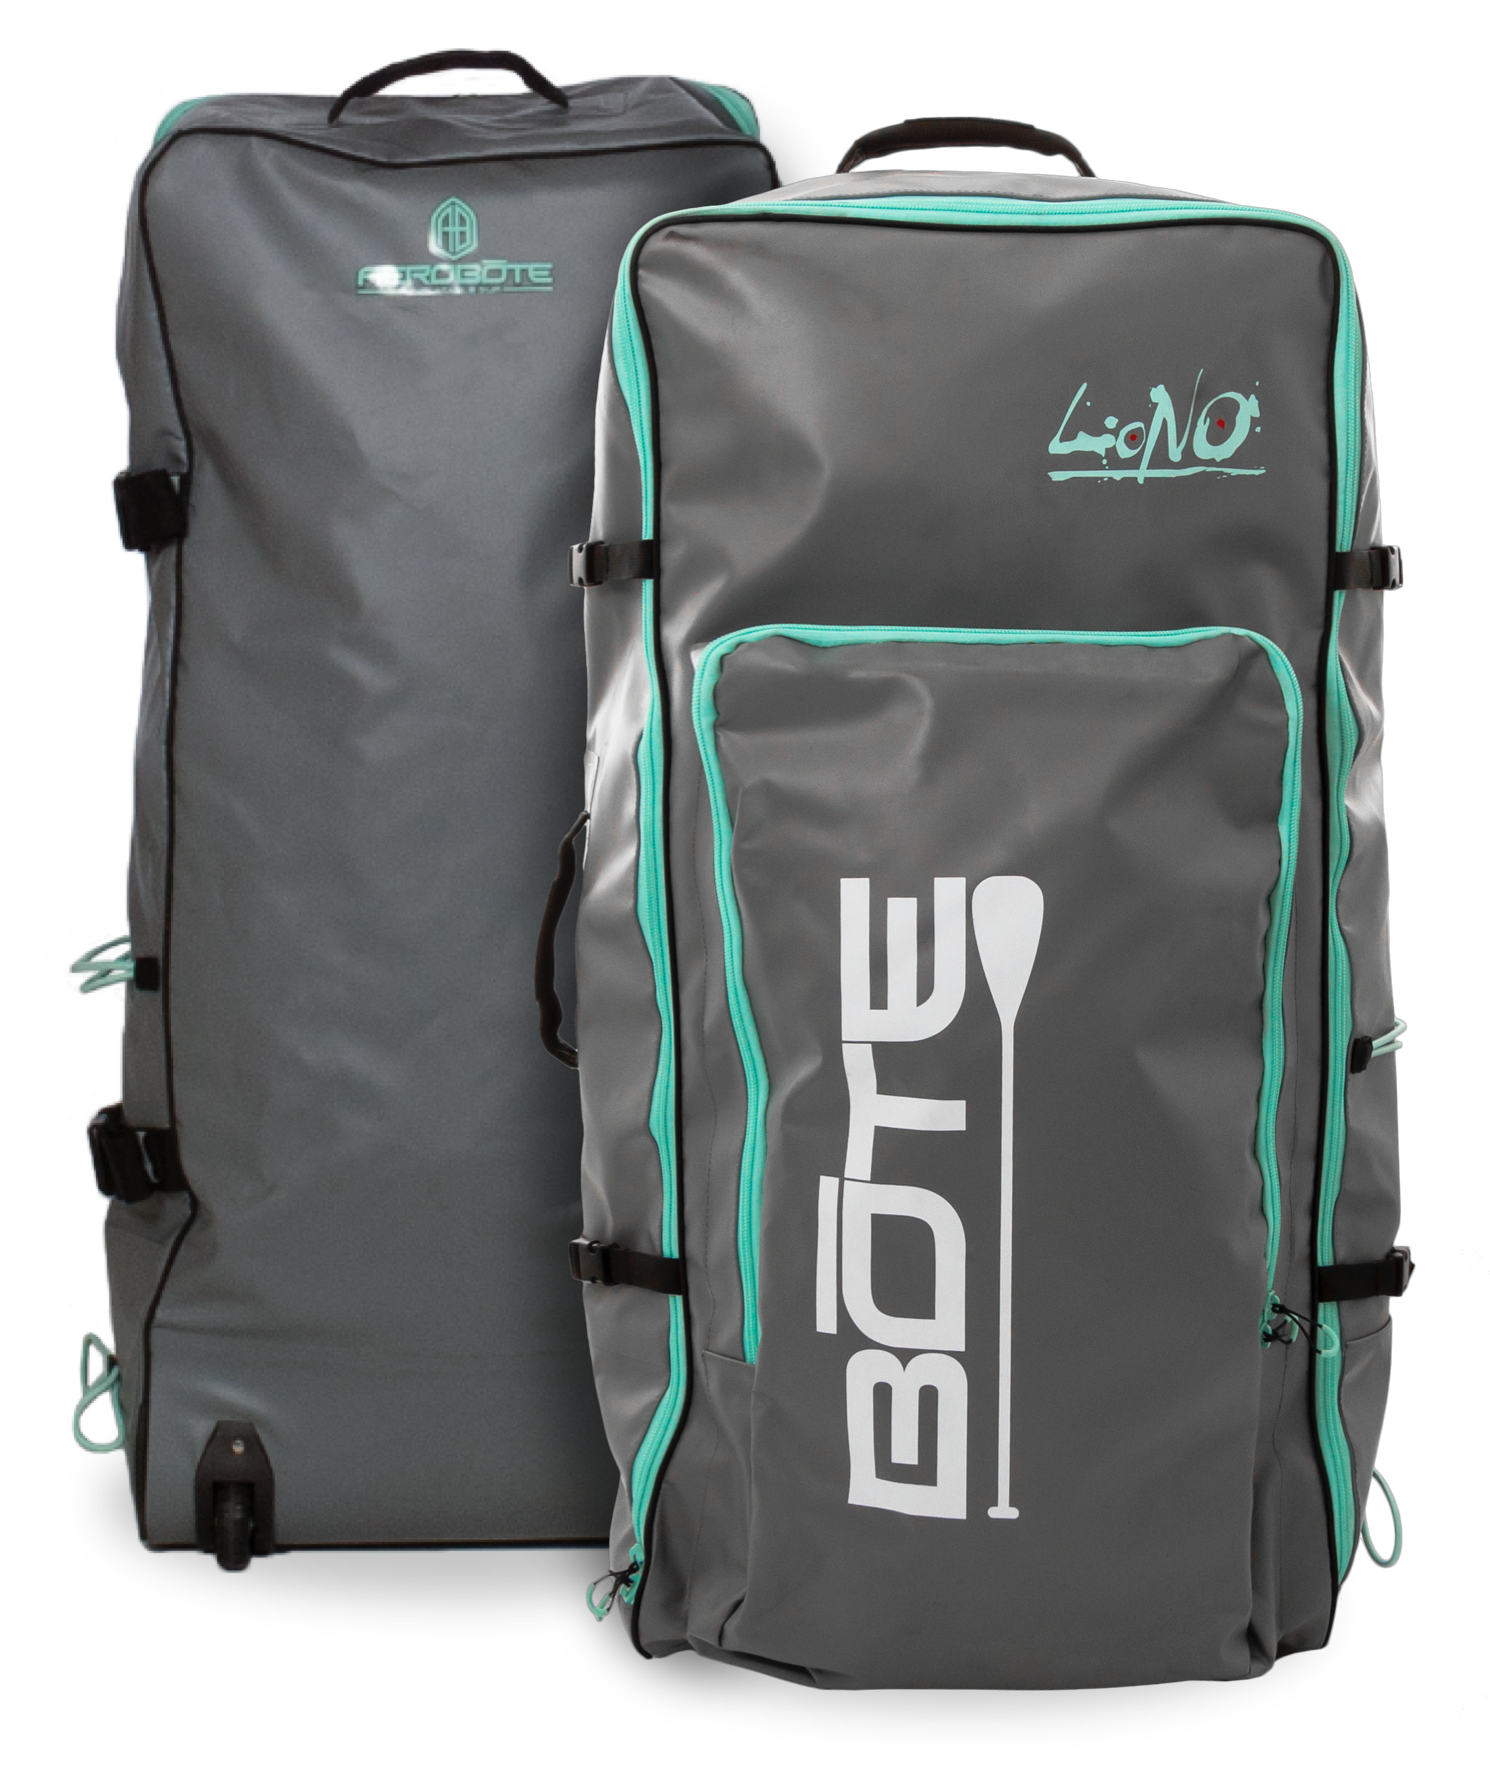 The LONO Travel Bag features rolling wheels to make transport quick and easy.